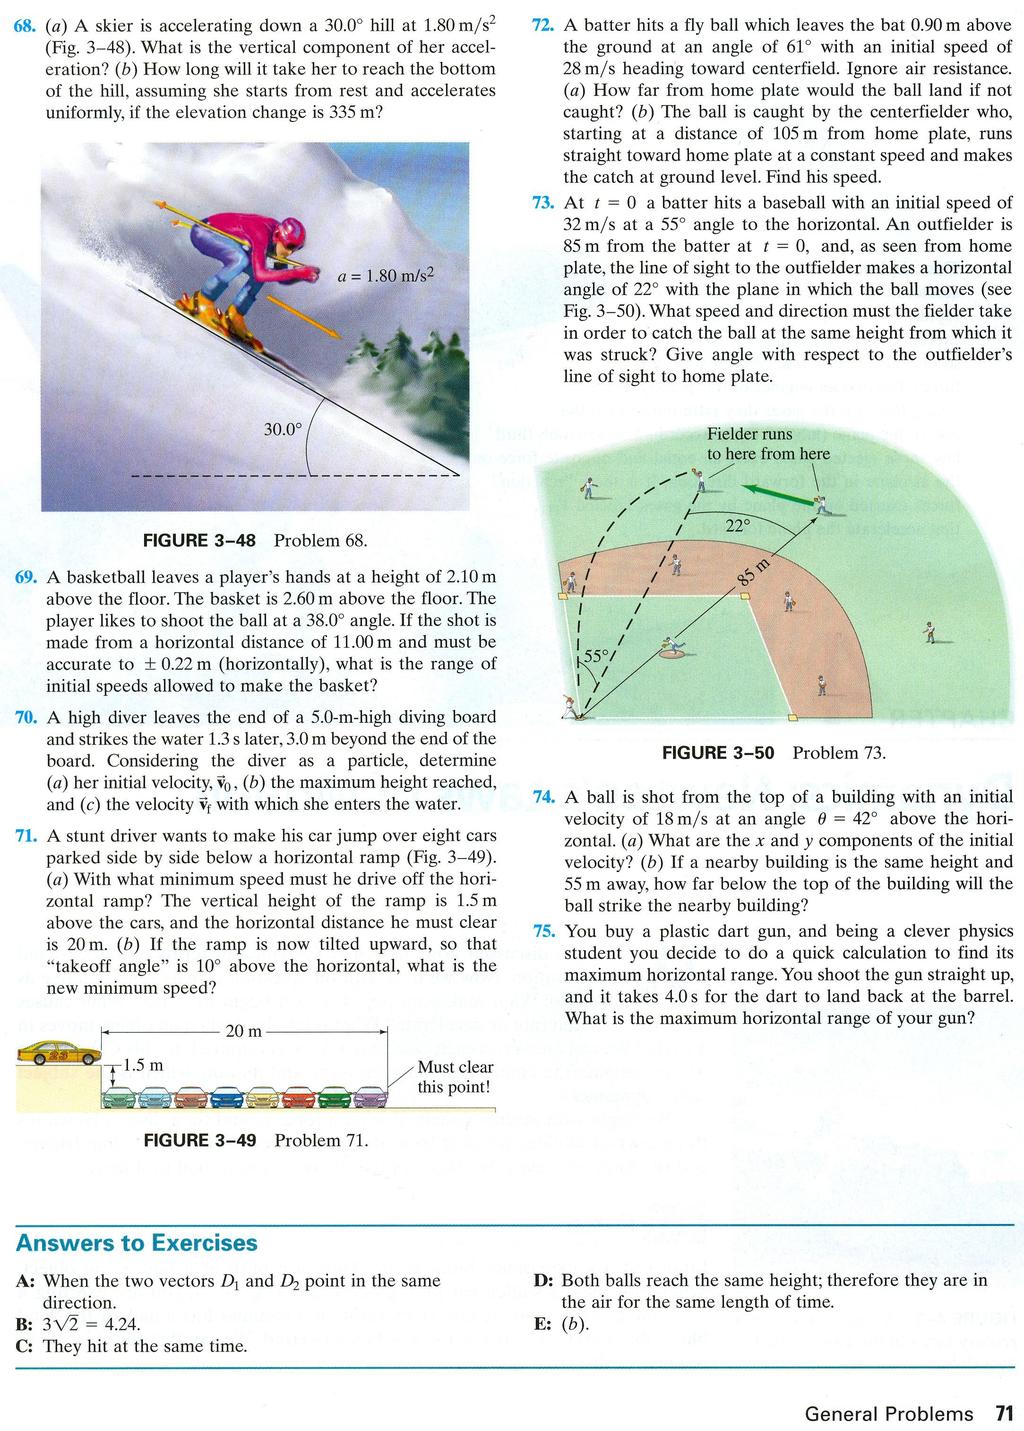 68. (a) A skier is accelerating down a 30.0 hill at 1.80 ms2 (Fig. 3-48). What is the vertical component of her acceleration?